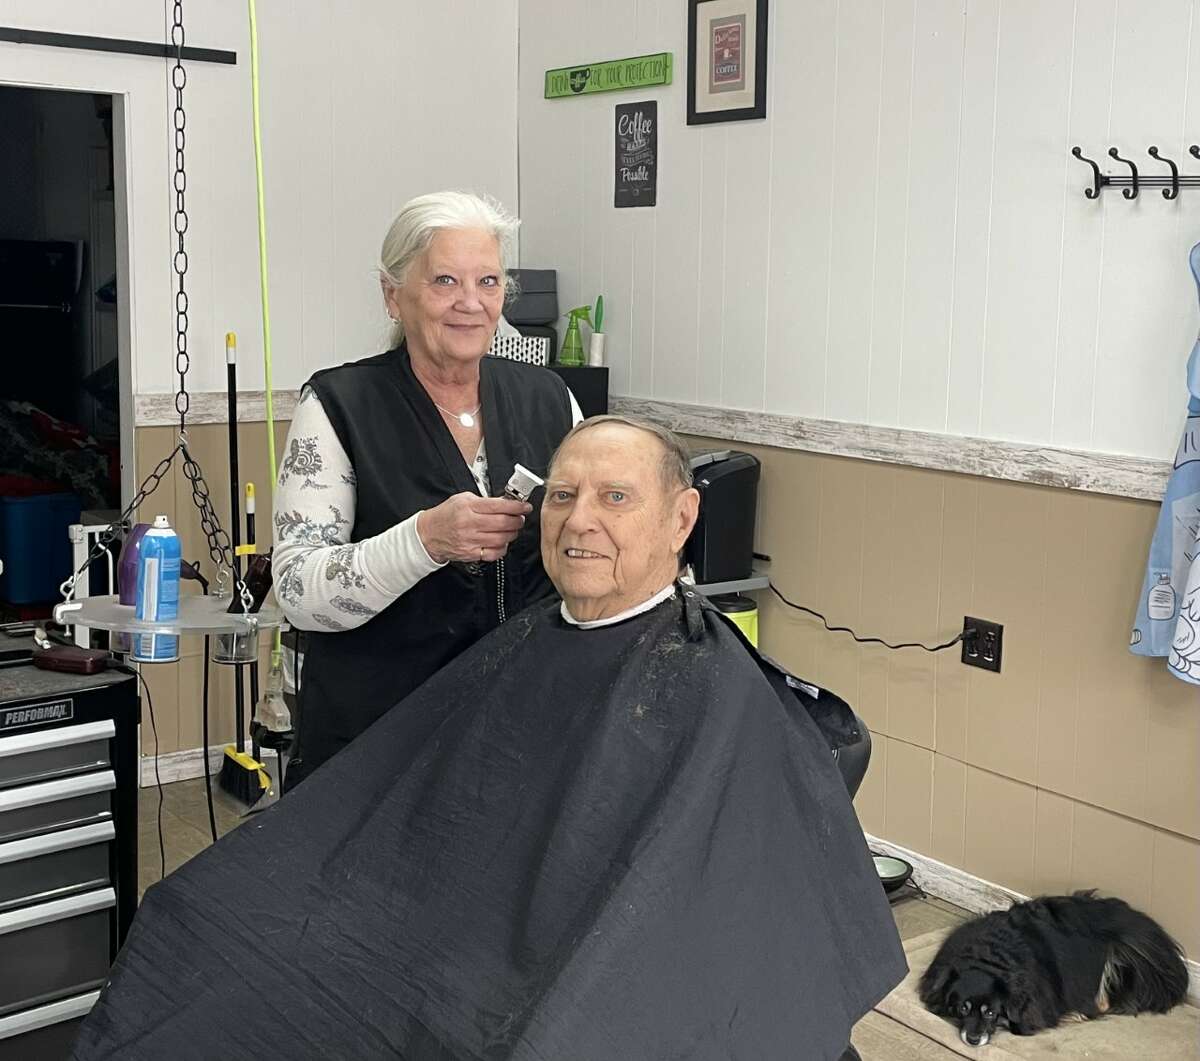 Arthur Schmidt, who has been getting his hair cut by Lorie Barnhart at Just Cutz in Reed City since she arrived in the area, gets a trim in preparation for New Year's Eve. "He's gonna be the life of the party," Barnhart said, referring to the New Years Eve ball drop that will take place in Reed City. Barnhart said she used to cut hair above the Reed City Hardware, and Schmidt said lots of barbers have come and gone.  "Arthur was coming to me then, it'x been five or six years," she said, saying she's probably the only one in a 15 mile radius.  